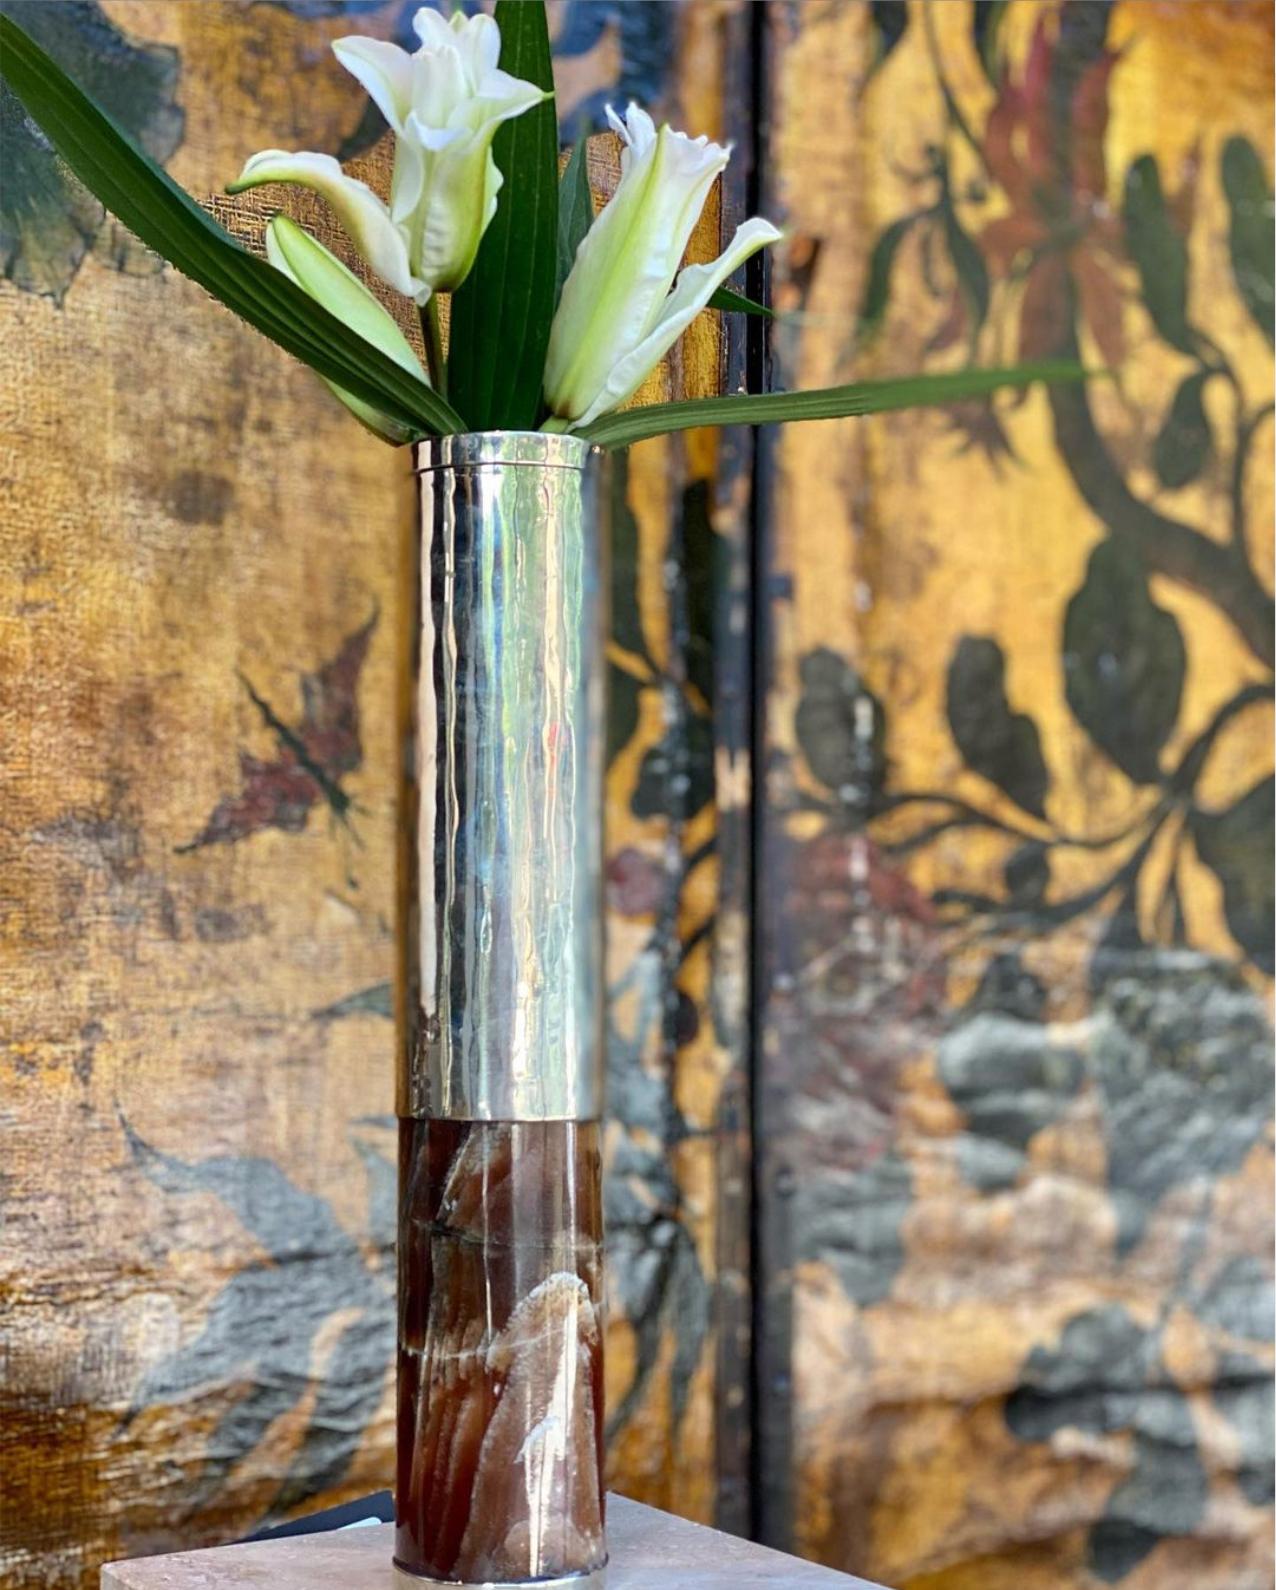 Hand-Crafted Salta Tube Set Flower Vases, Alpaca Silver & Brown Onyx For Sale